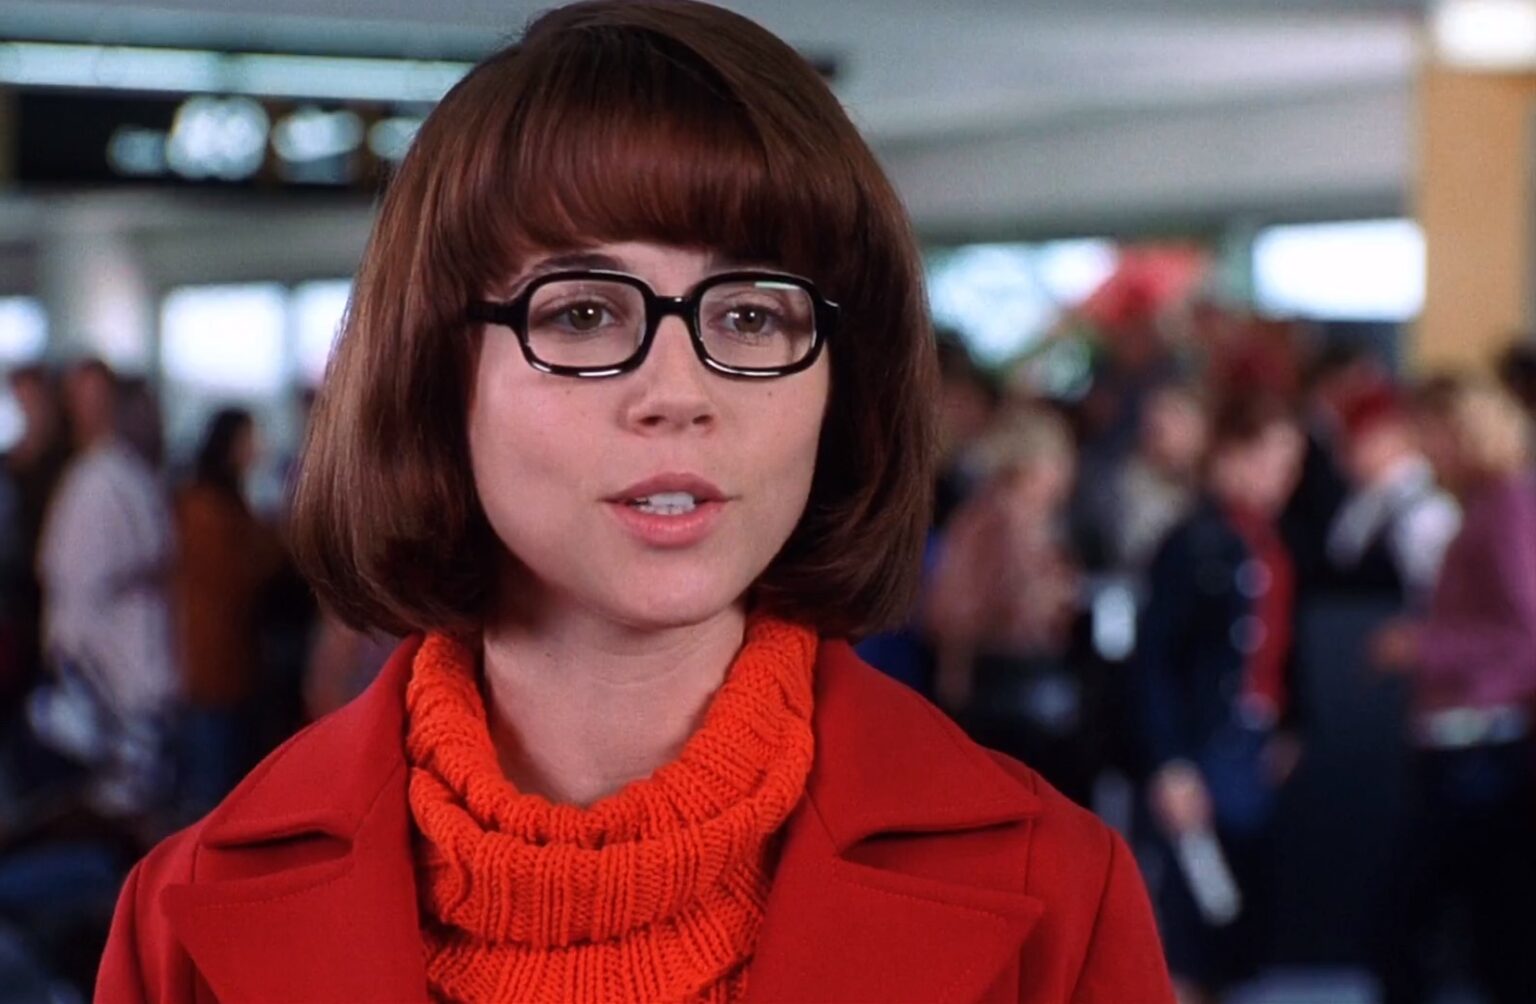 Queer icon Velma is officially, openly gay! Why isn't this shown in the 'Scooby Doo' movies? Here's everything we know.